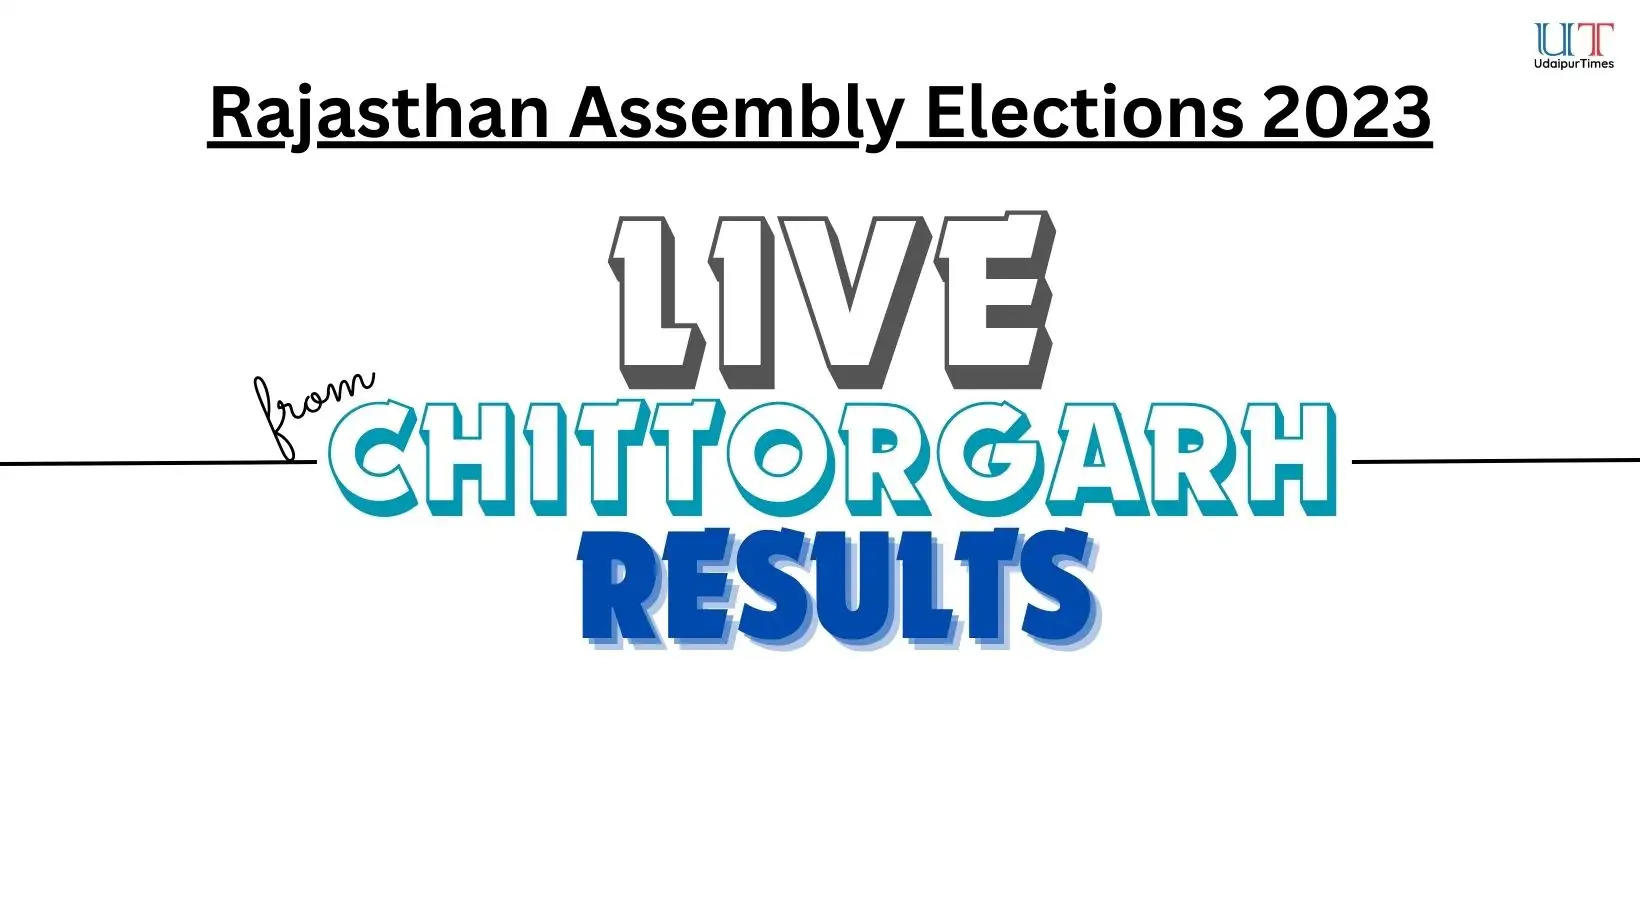 Live Election Results from Chittorgarh Rajasthan Assembly Elections 2023 LIVE Results